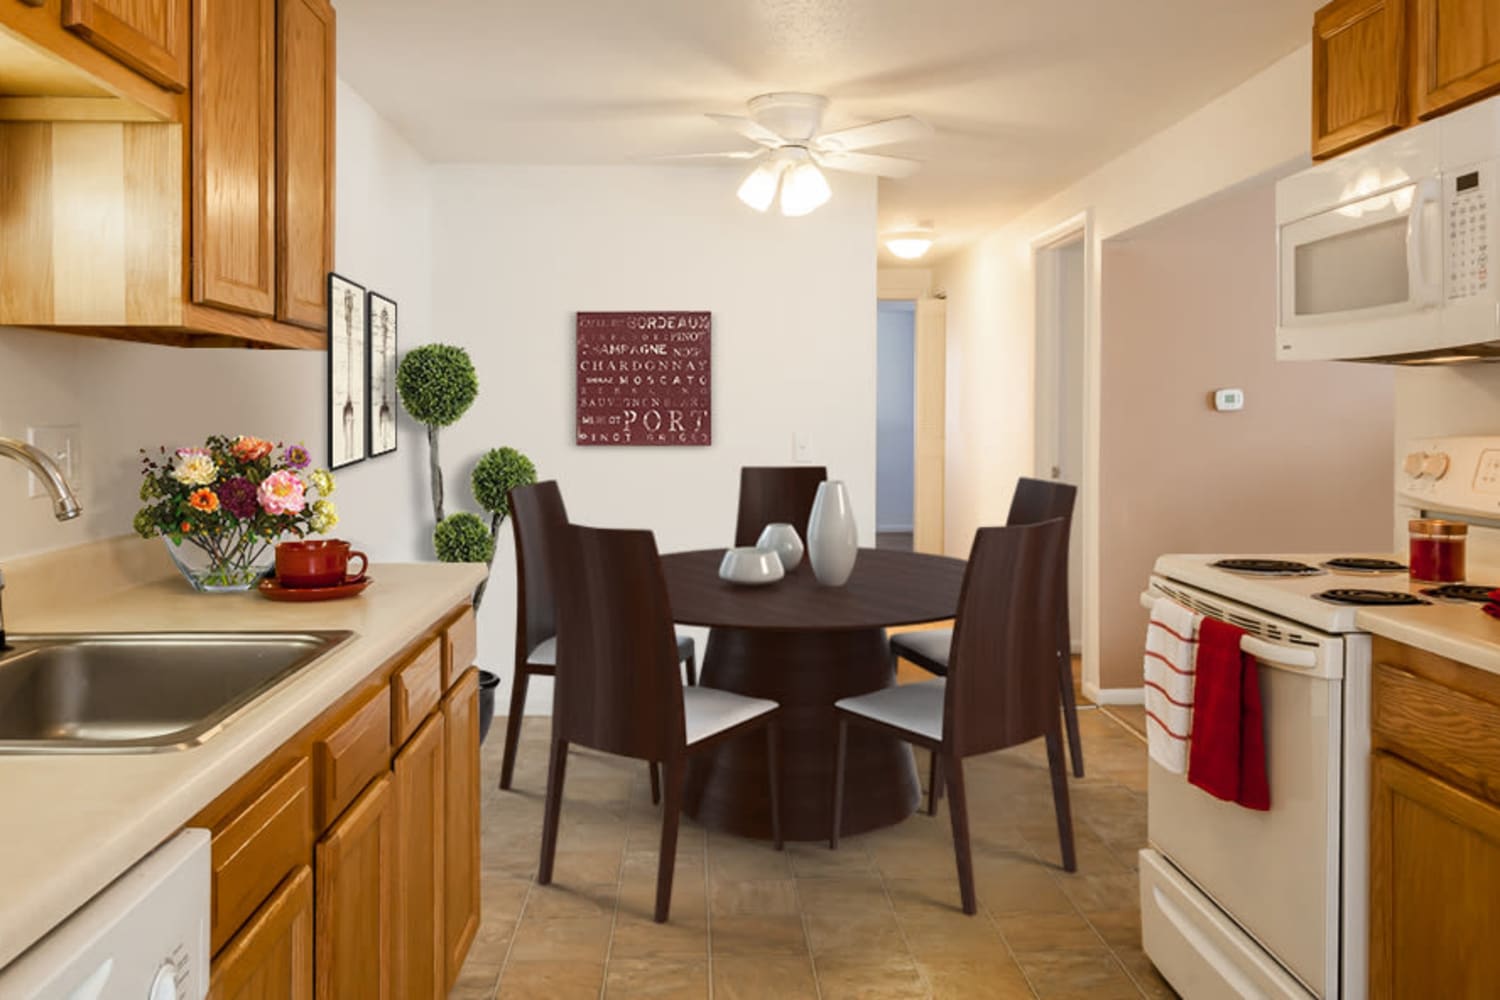 Kitchen and dining table at King's Court Manor Apartments in Rochester, New York